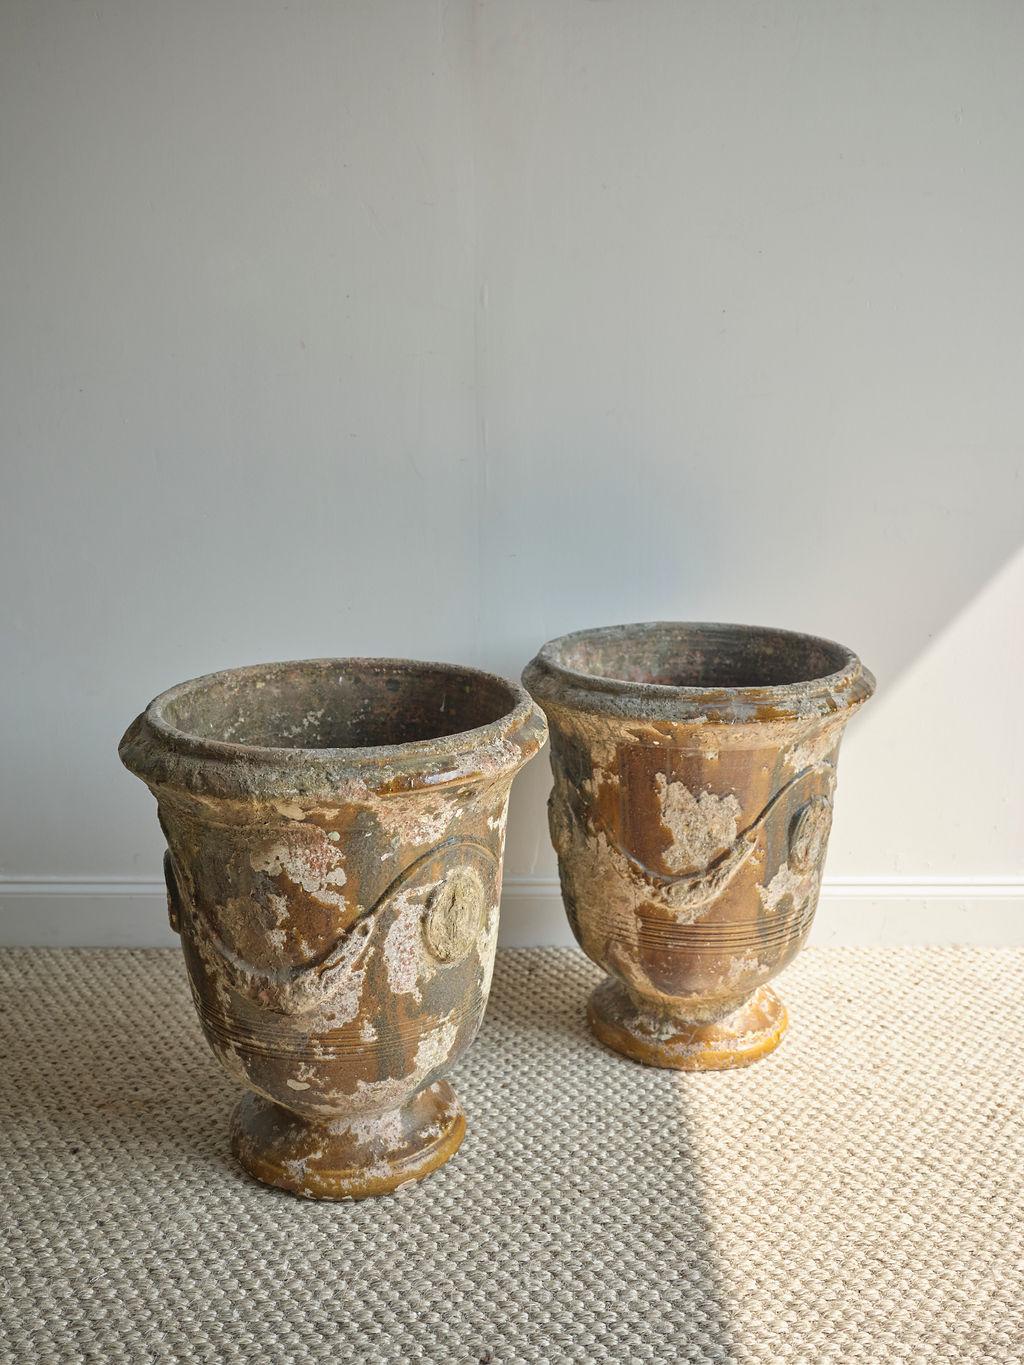 These large 19th century urns would make a huge statement in your indoor or outdoor space. They are made out of concrete and finished with some sort of lacquer or paint, which is chipping naturally from age and use. The paint chipping gives these